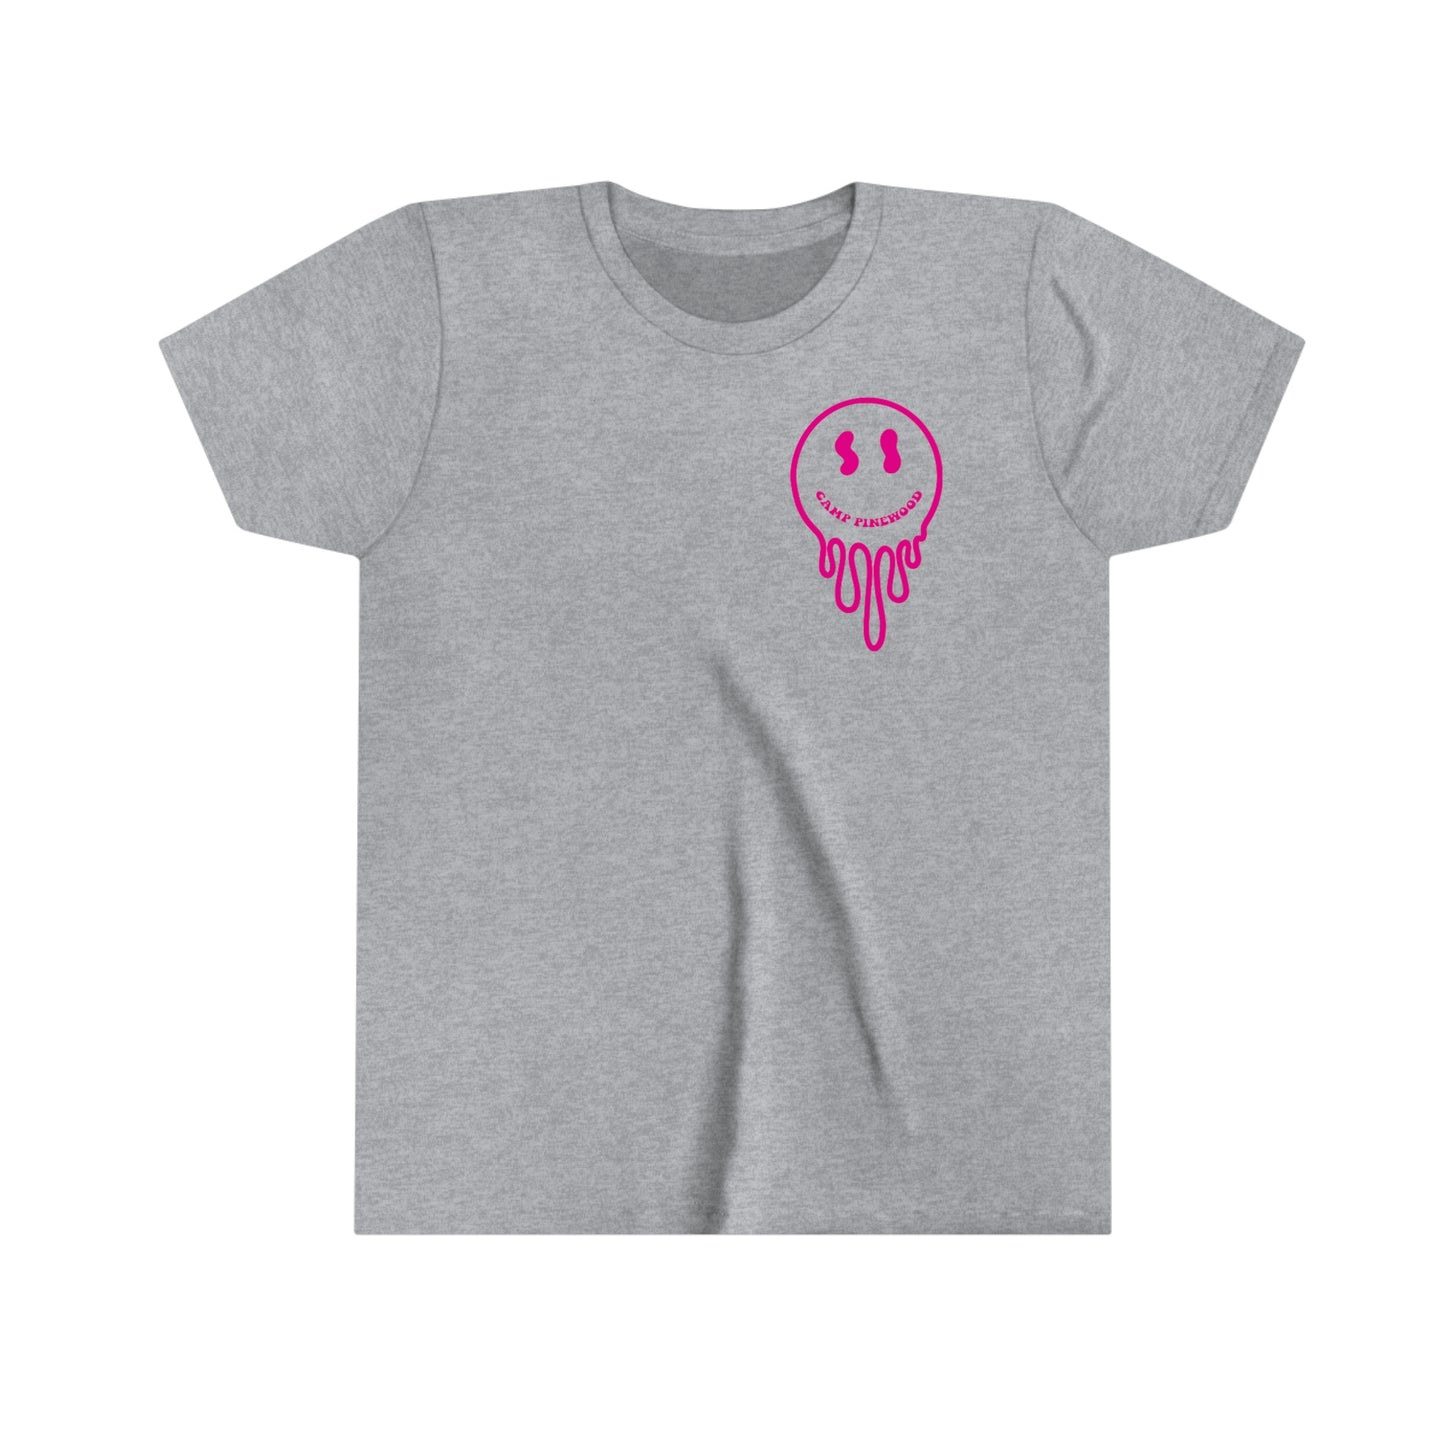 Pinewood Pink Drip Smiley Youth SS Tee (multiple colors)